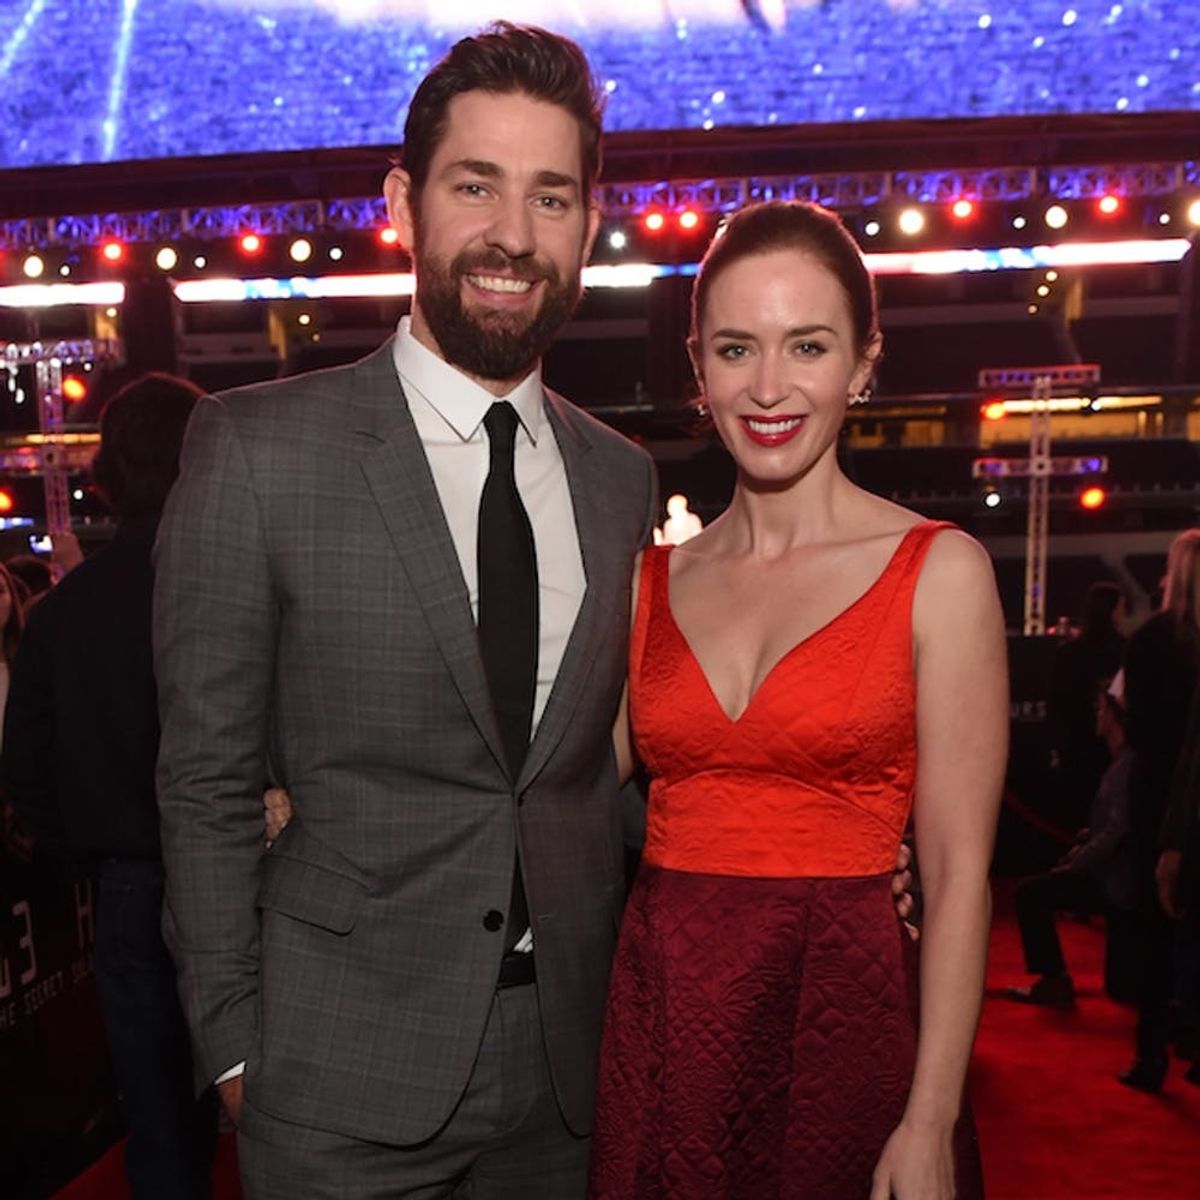 John Krasinski and Emily Blunt are Expecting Baby Number Two!